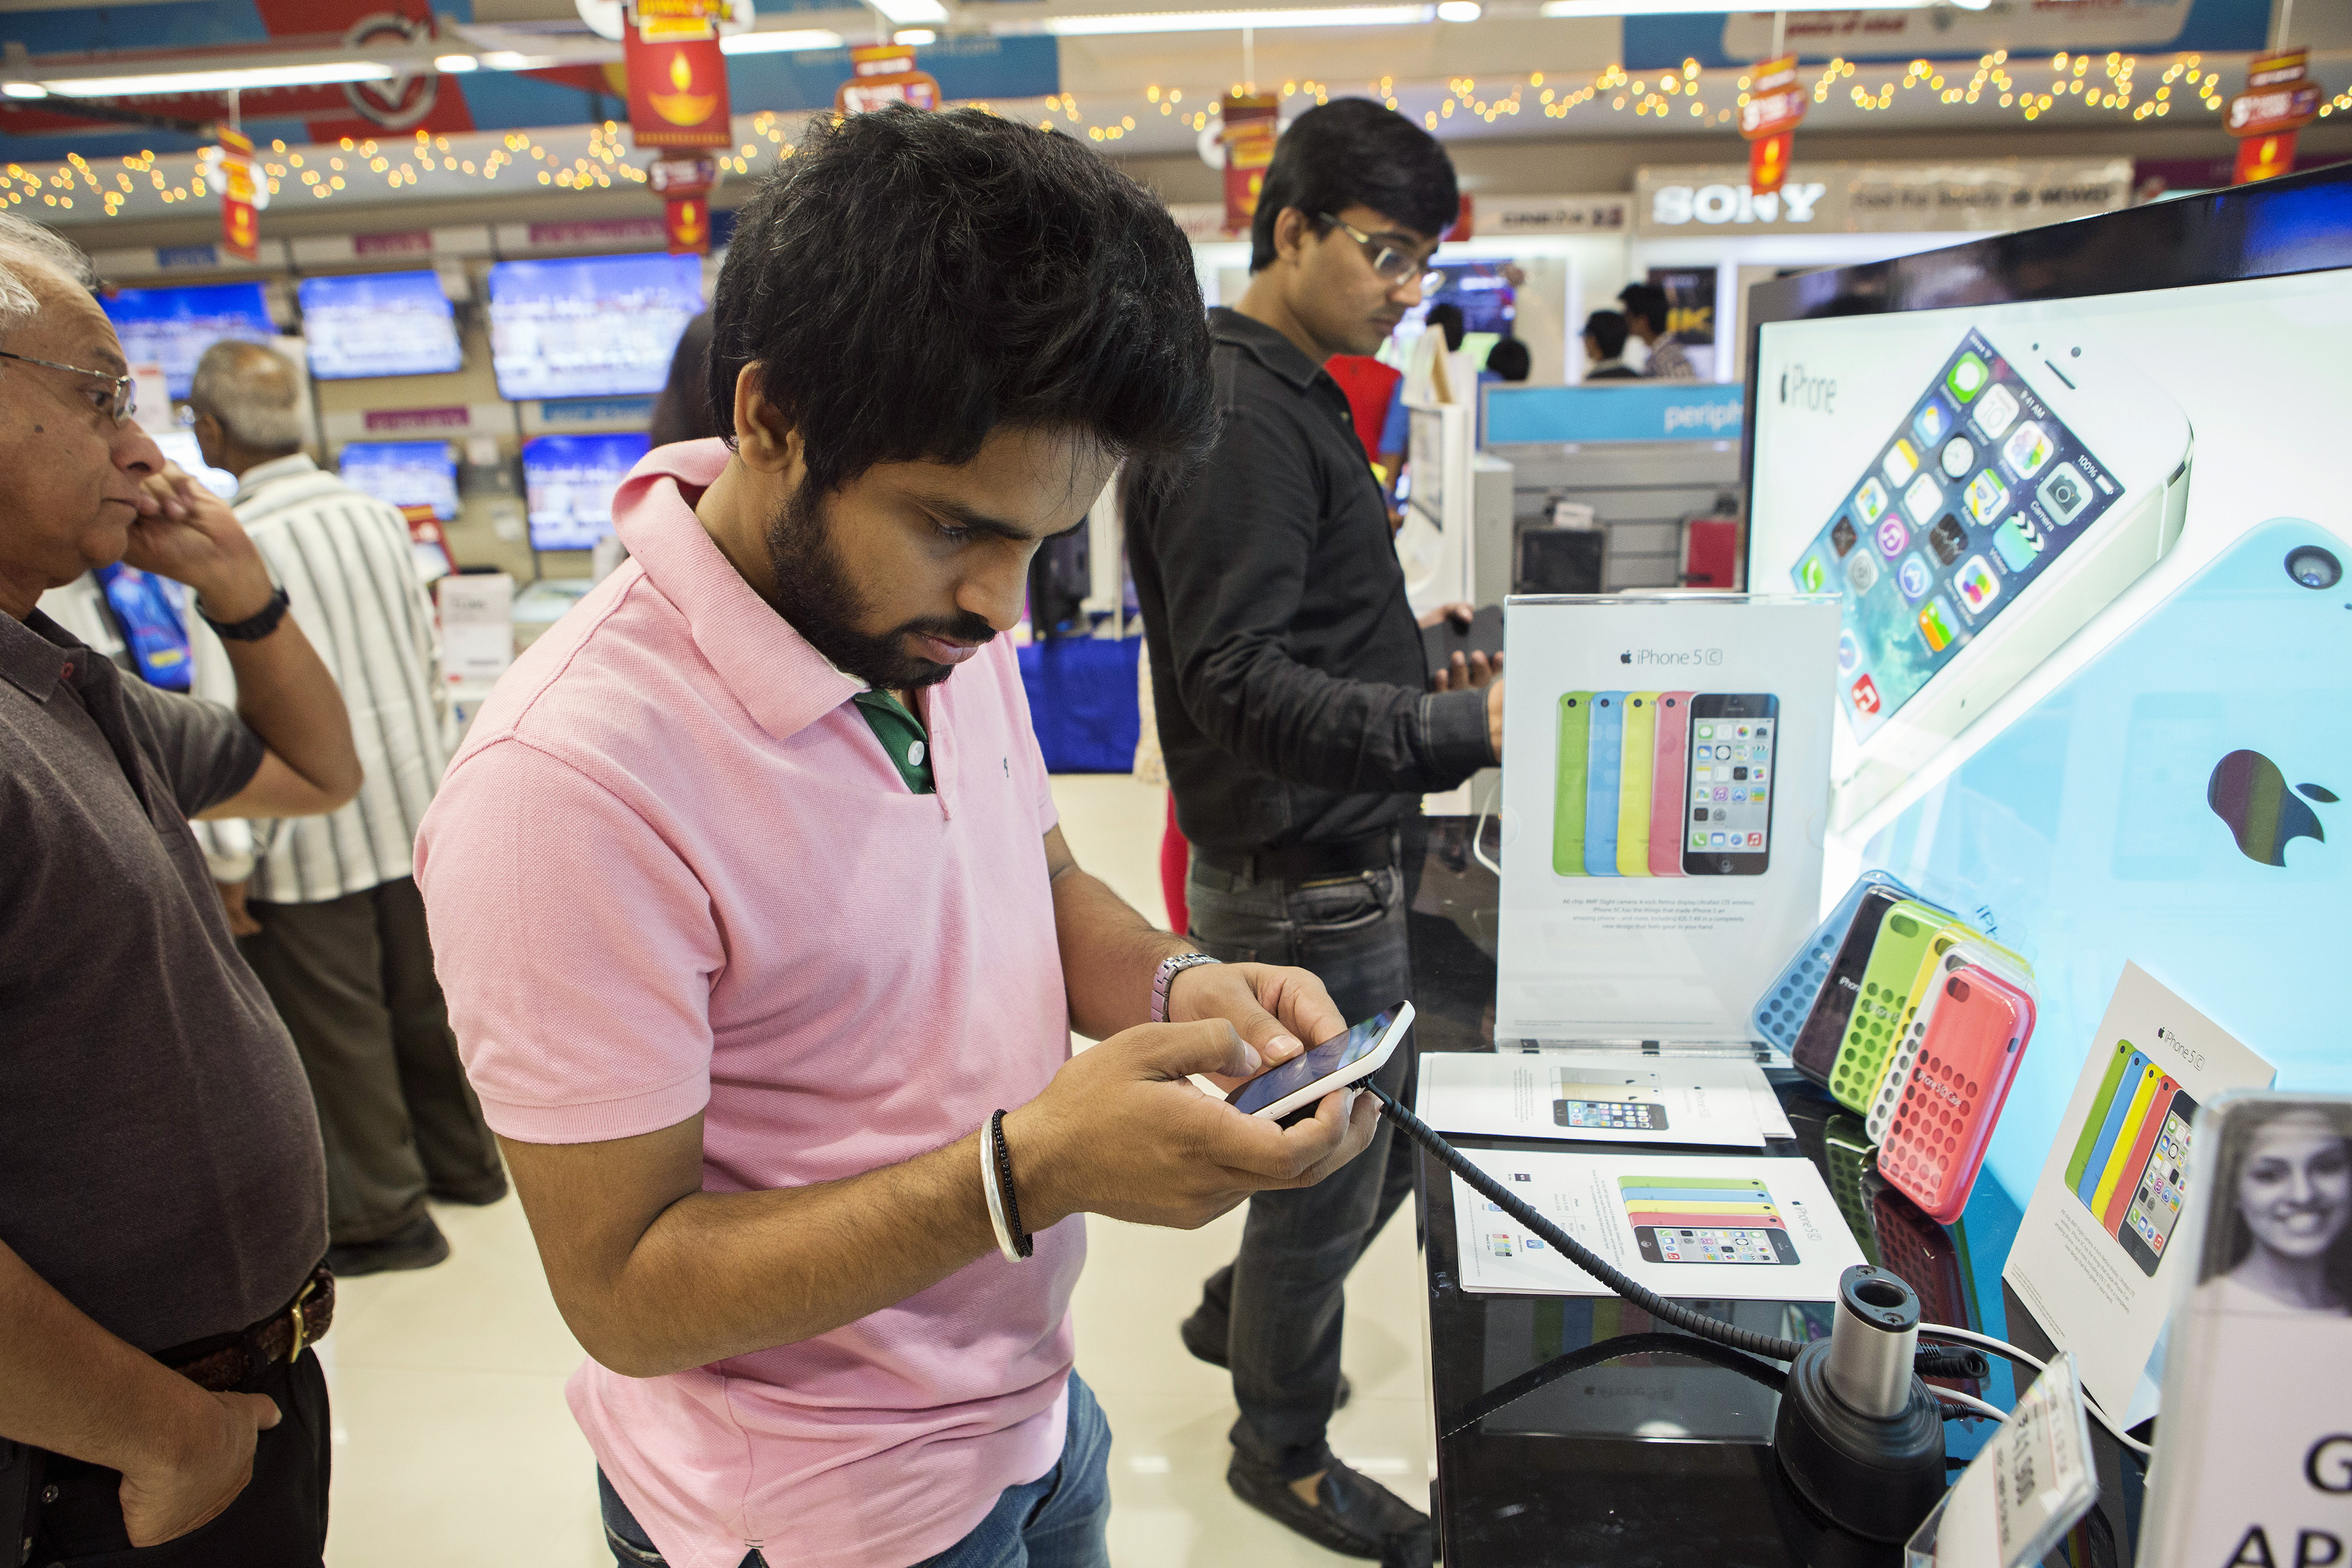 A customer tries out an Apple Inc. iPhone 5C at a Reliance Digital store, a subsidiary of Reliance Industries Ltd., in New Delhi, India, on Saturday, Nov. 2, 2013. (Bloomberg—Bloomberg via Getty Images)